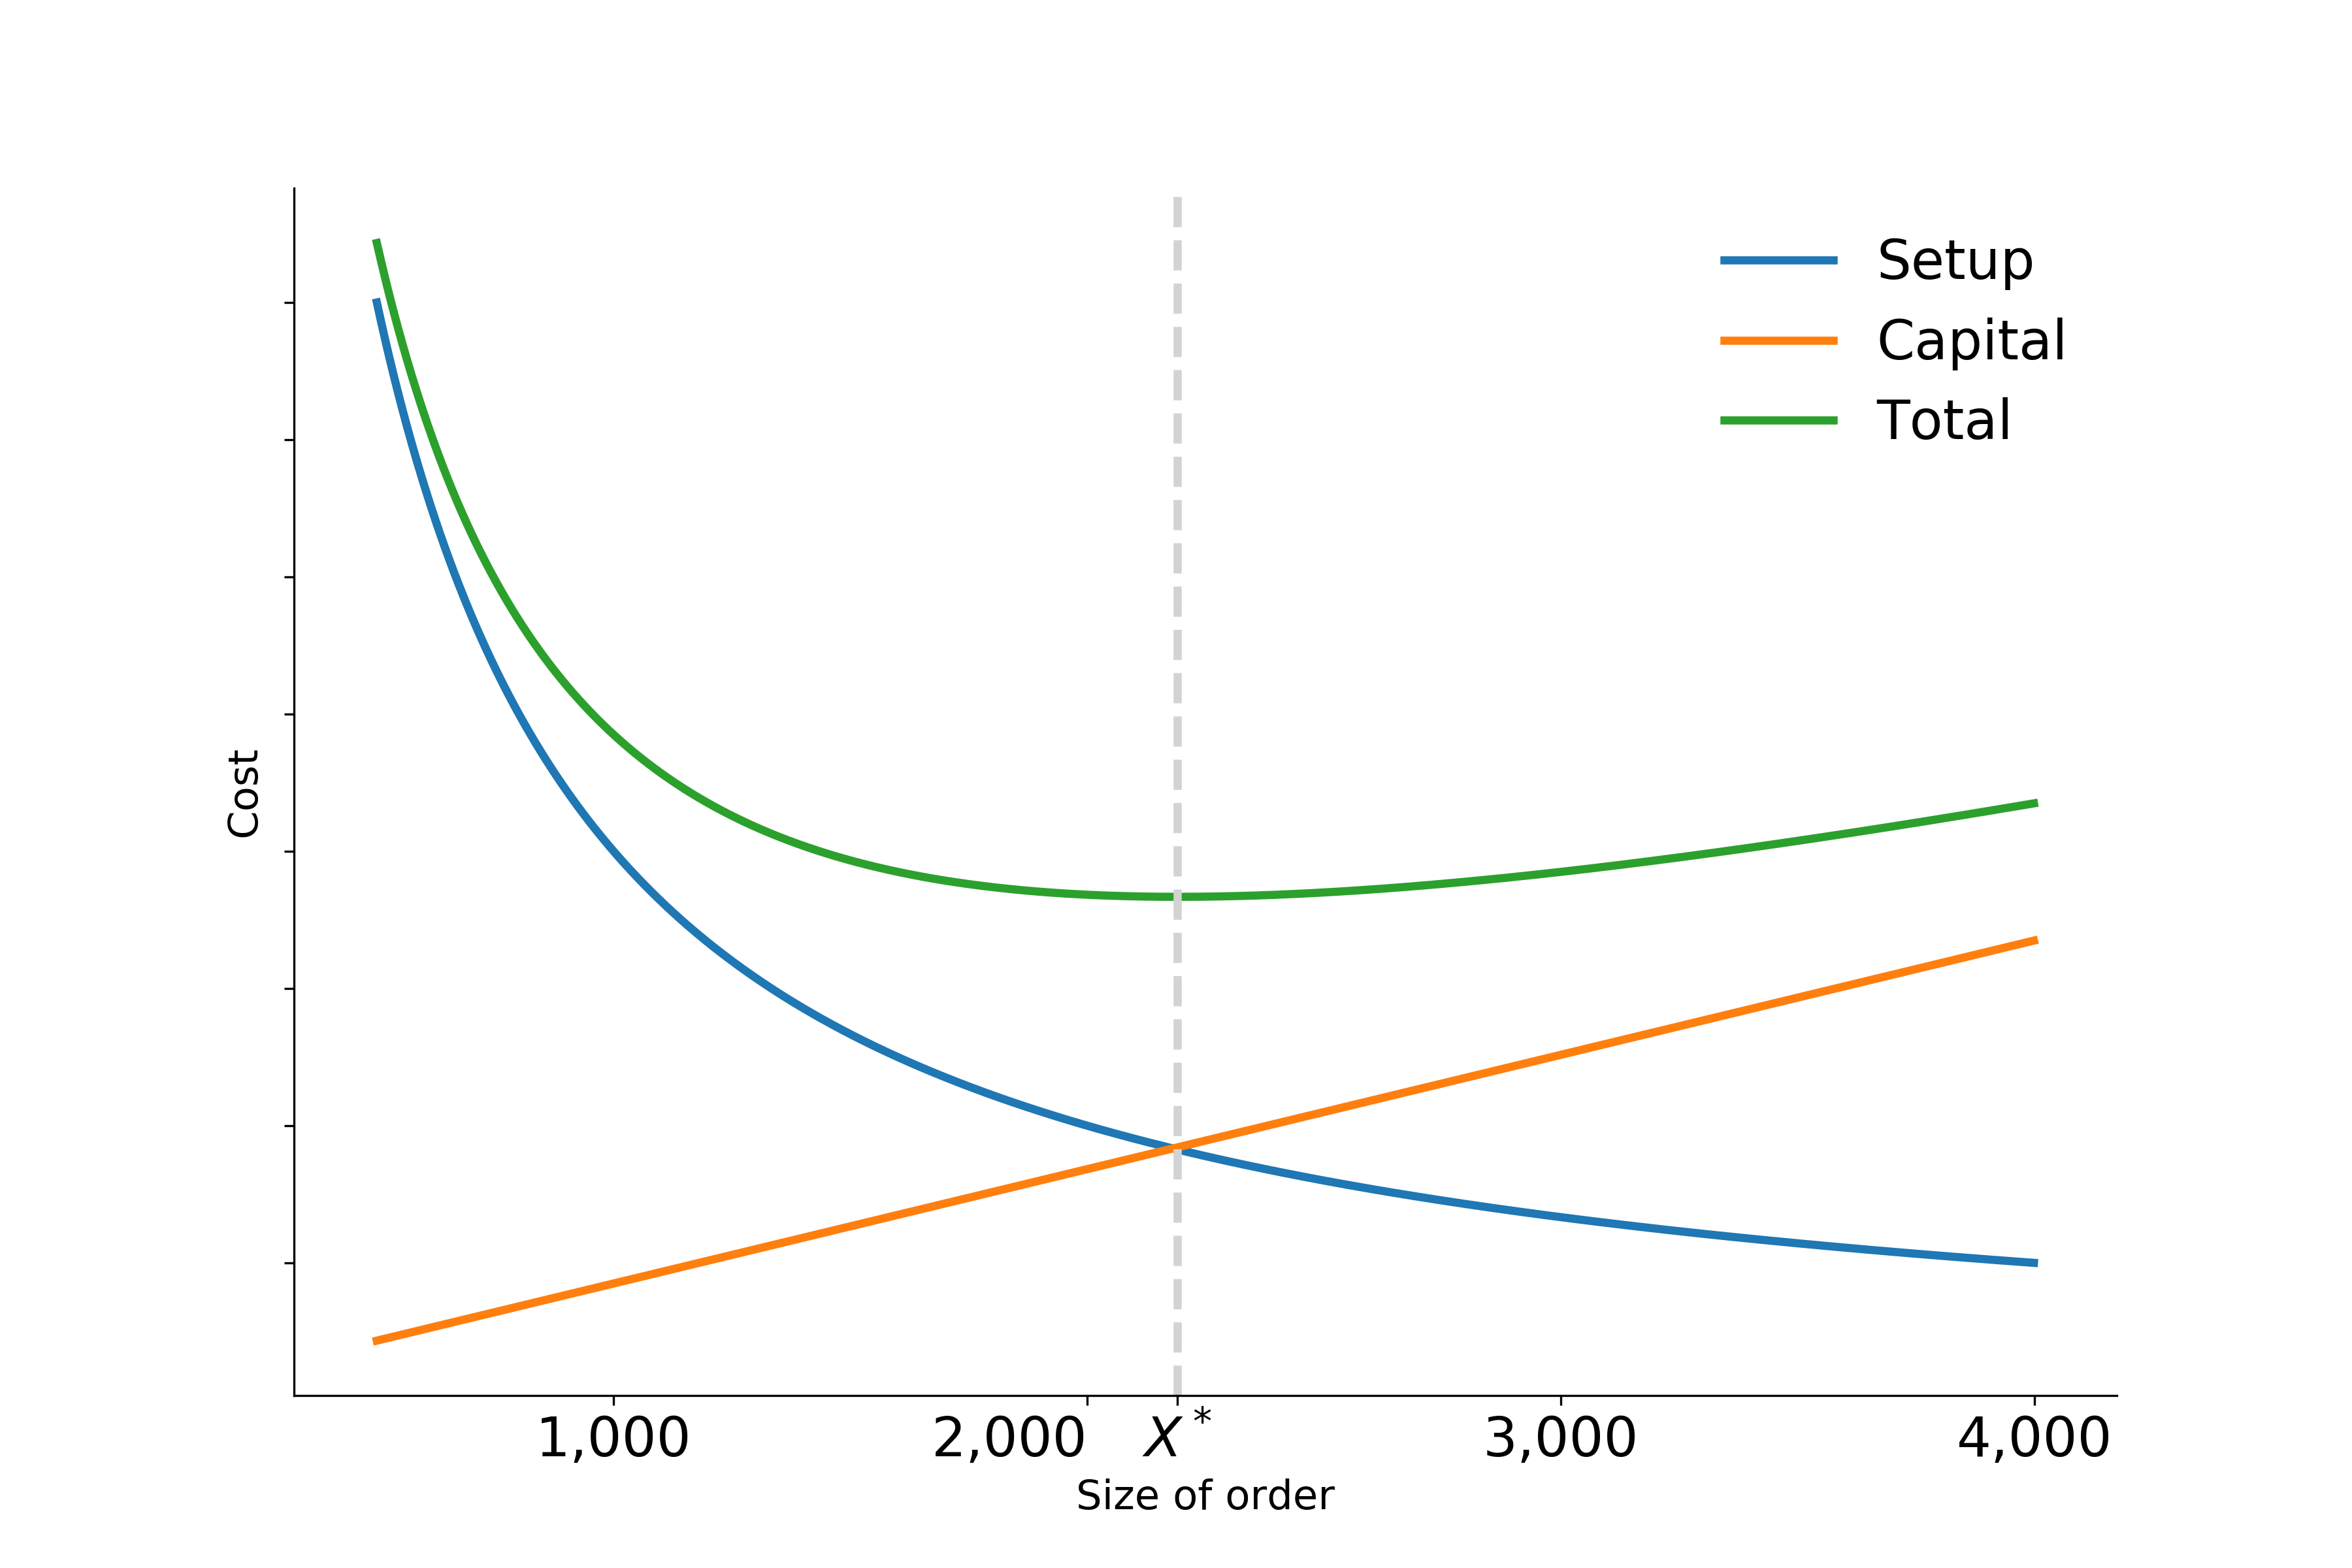 Increase in size of order causes decrease in setup cost and increase in capital cost.